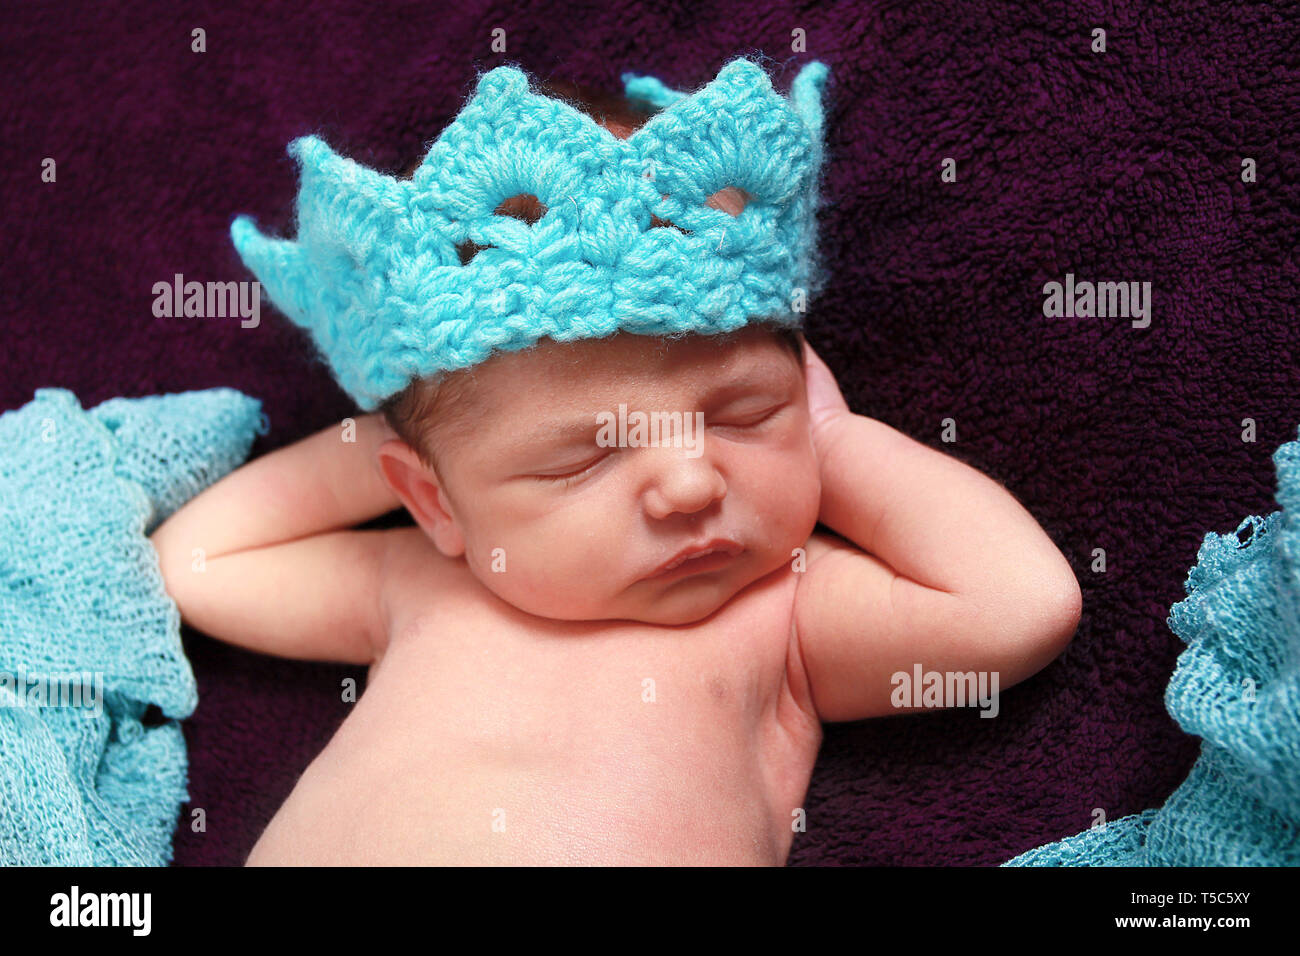 New Born Baby Boy sleeping Banque D'Images